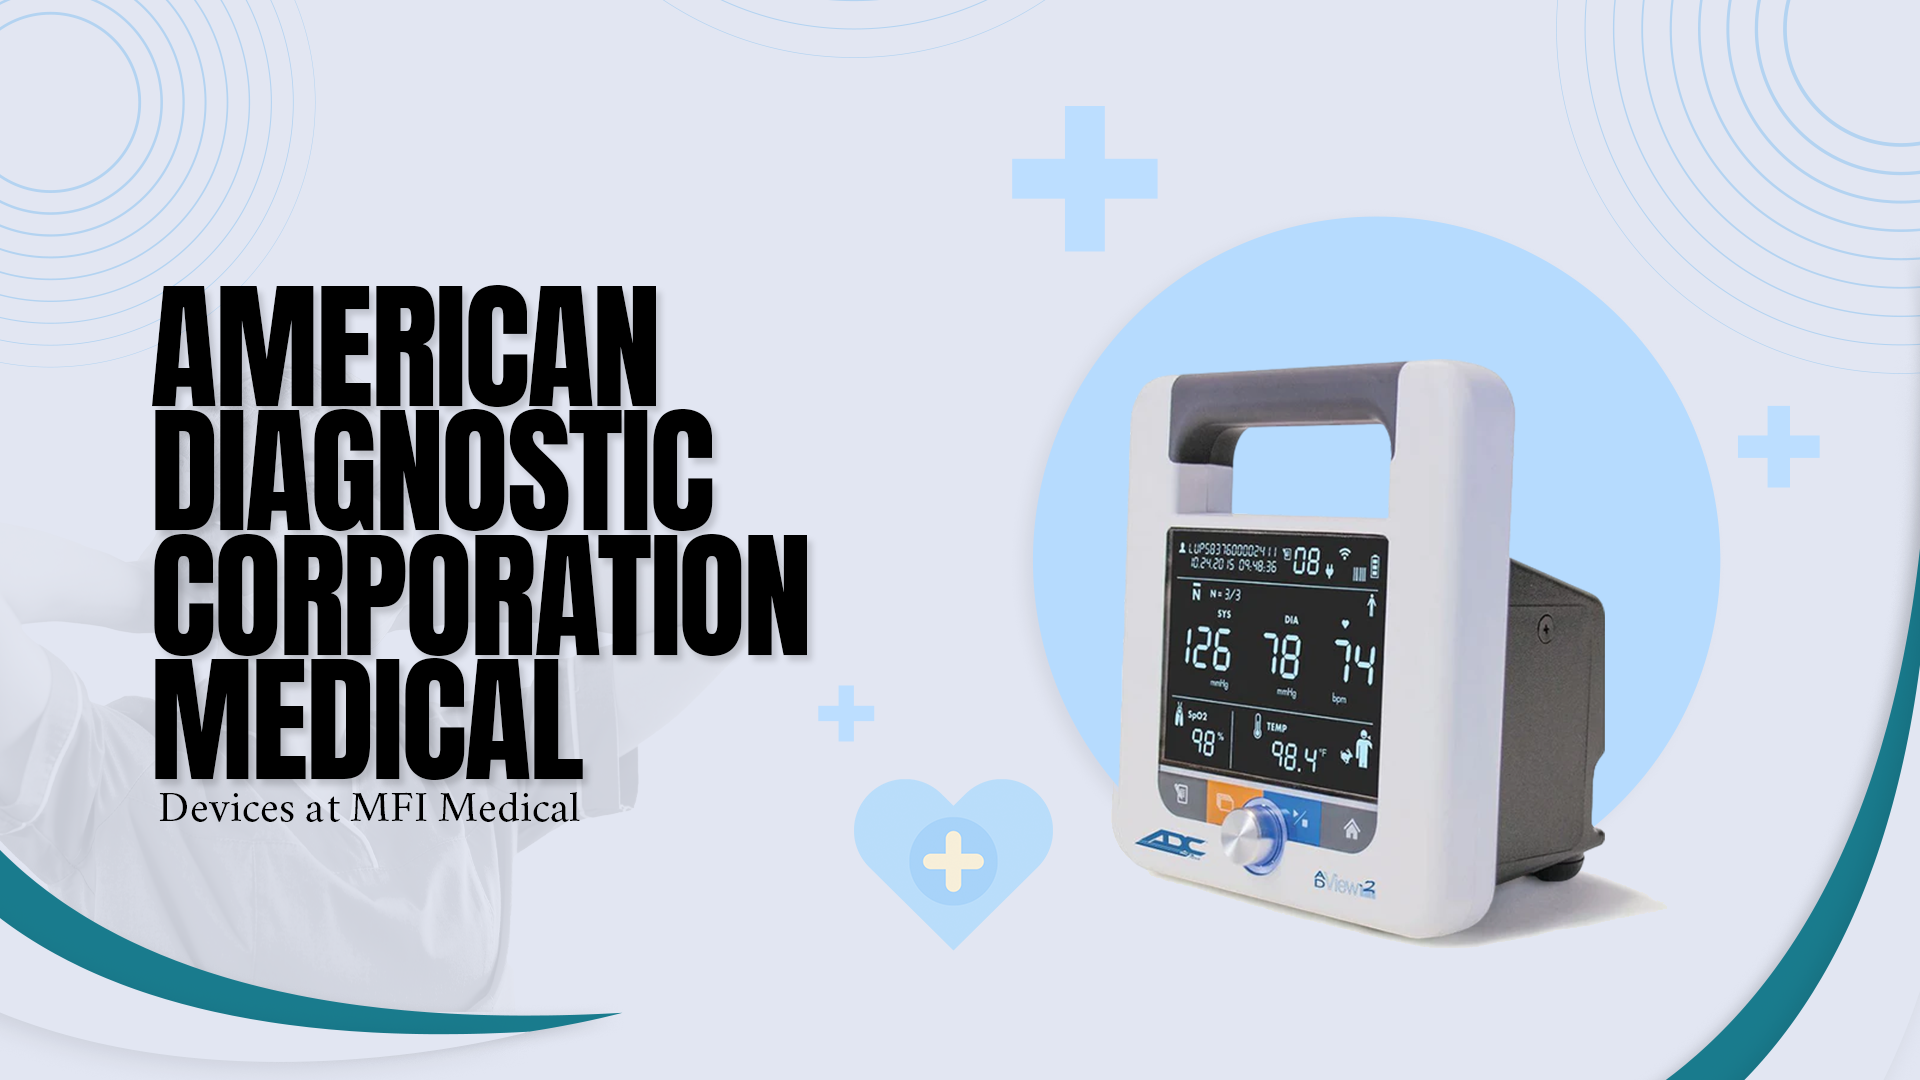 American Diagnostic Corporation Medical Devices at MFI Medical